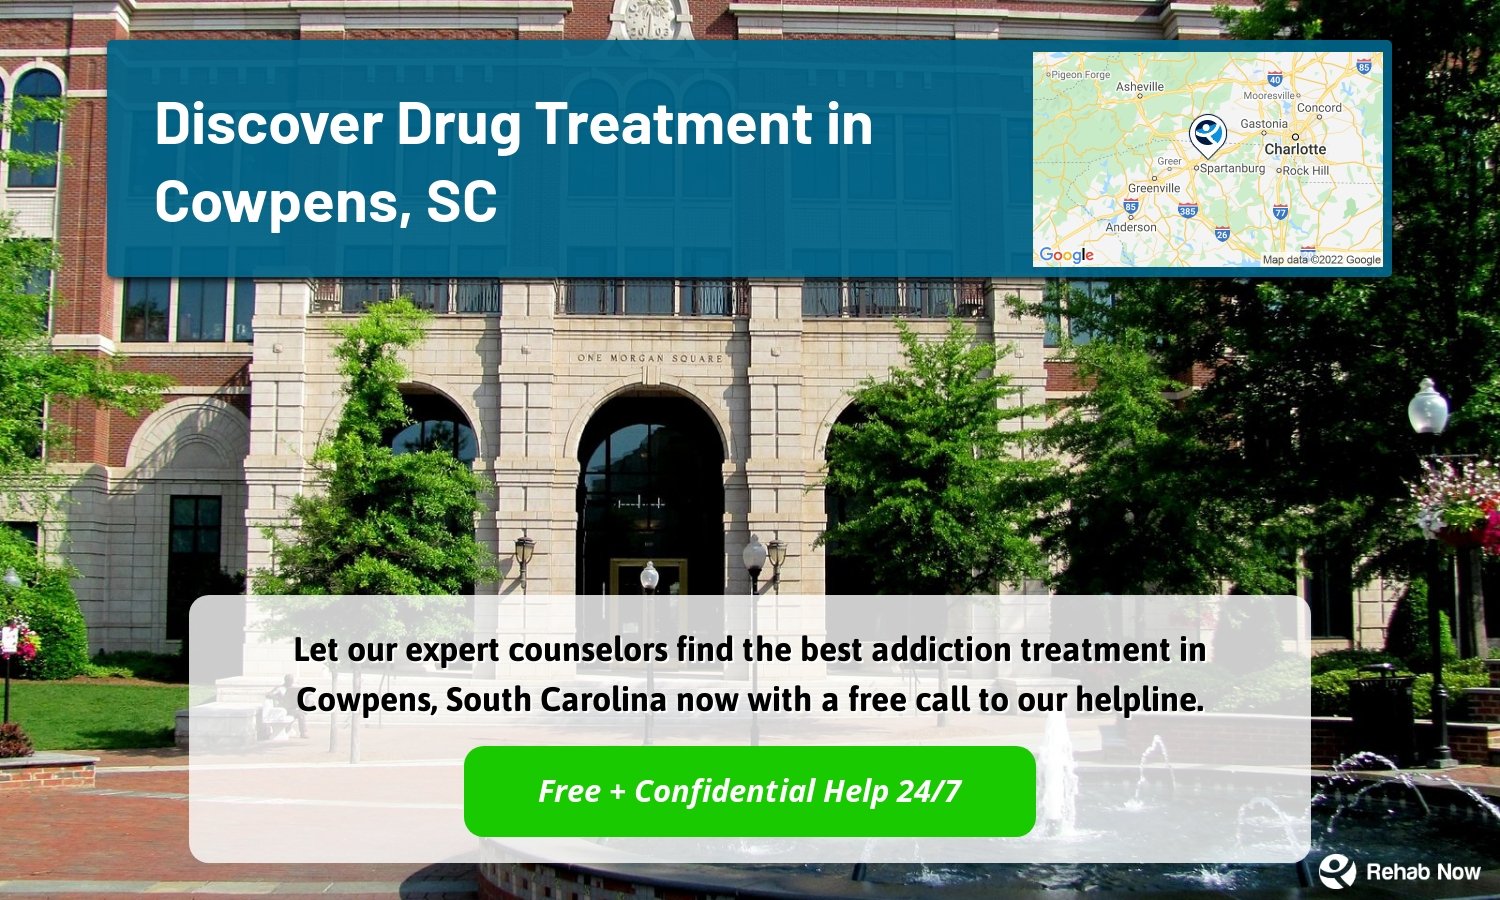 Let our expert counselors find the best addiction treatment in Cowpens, South Carolina now with a free call to our helpline.